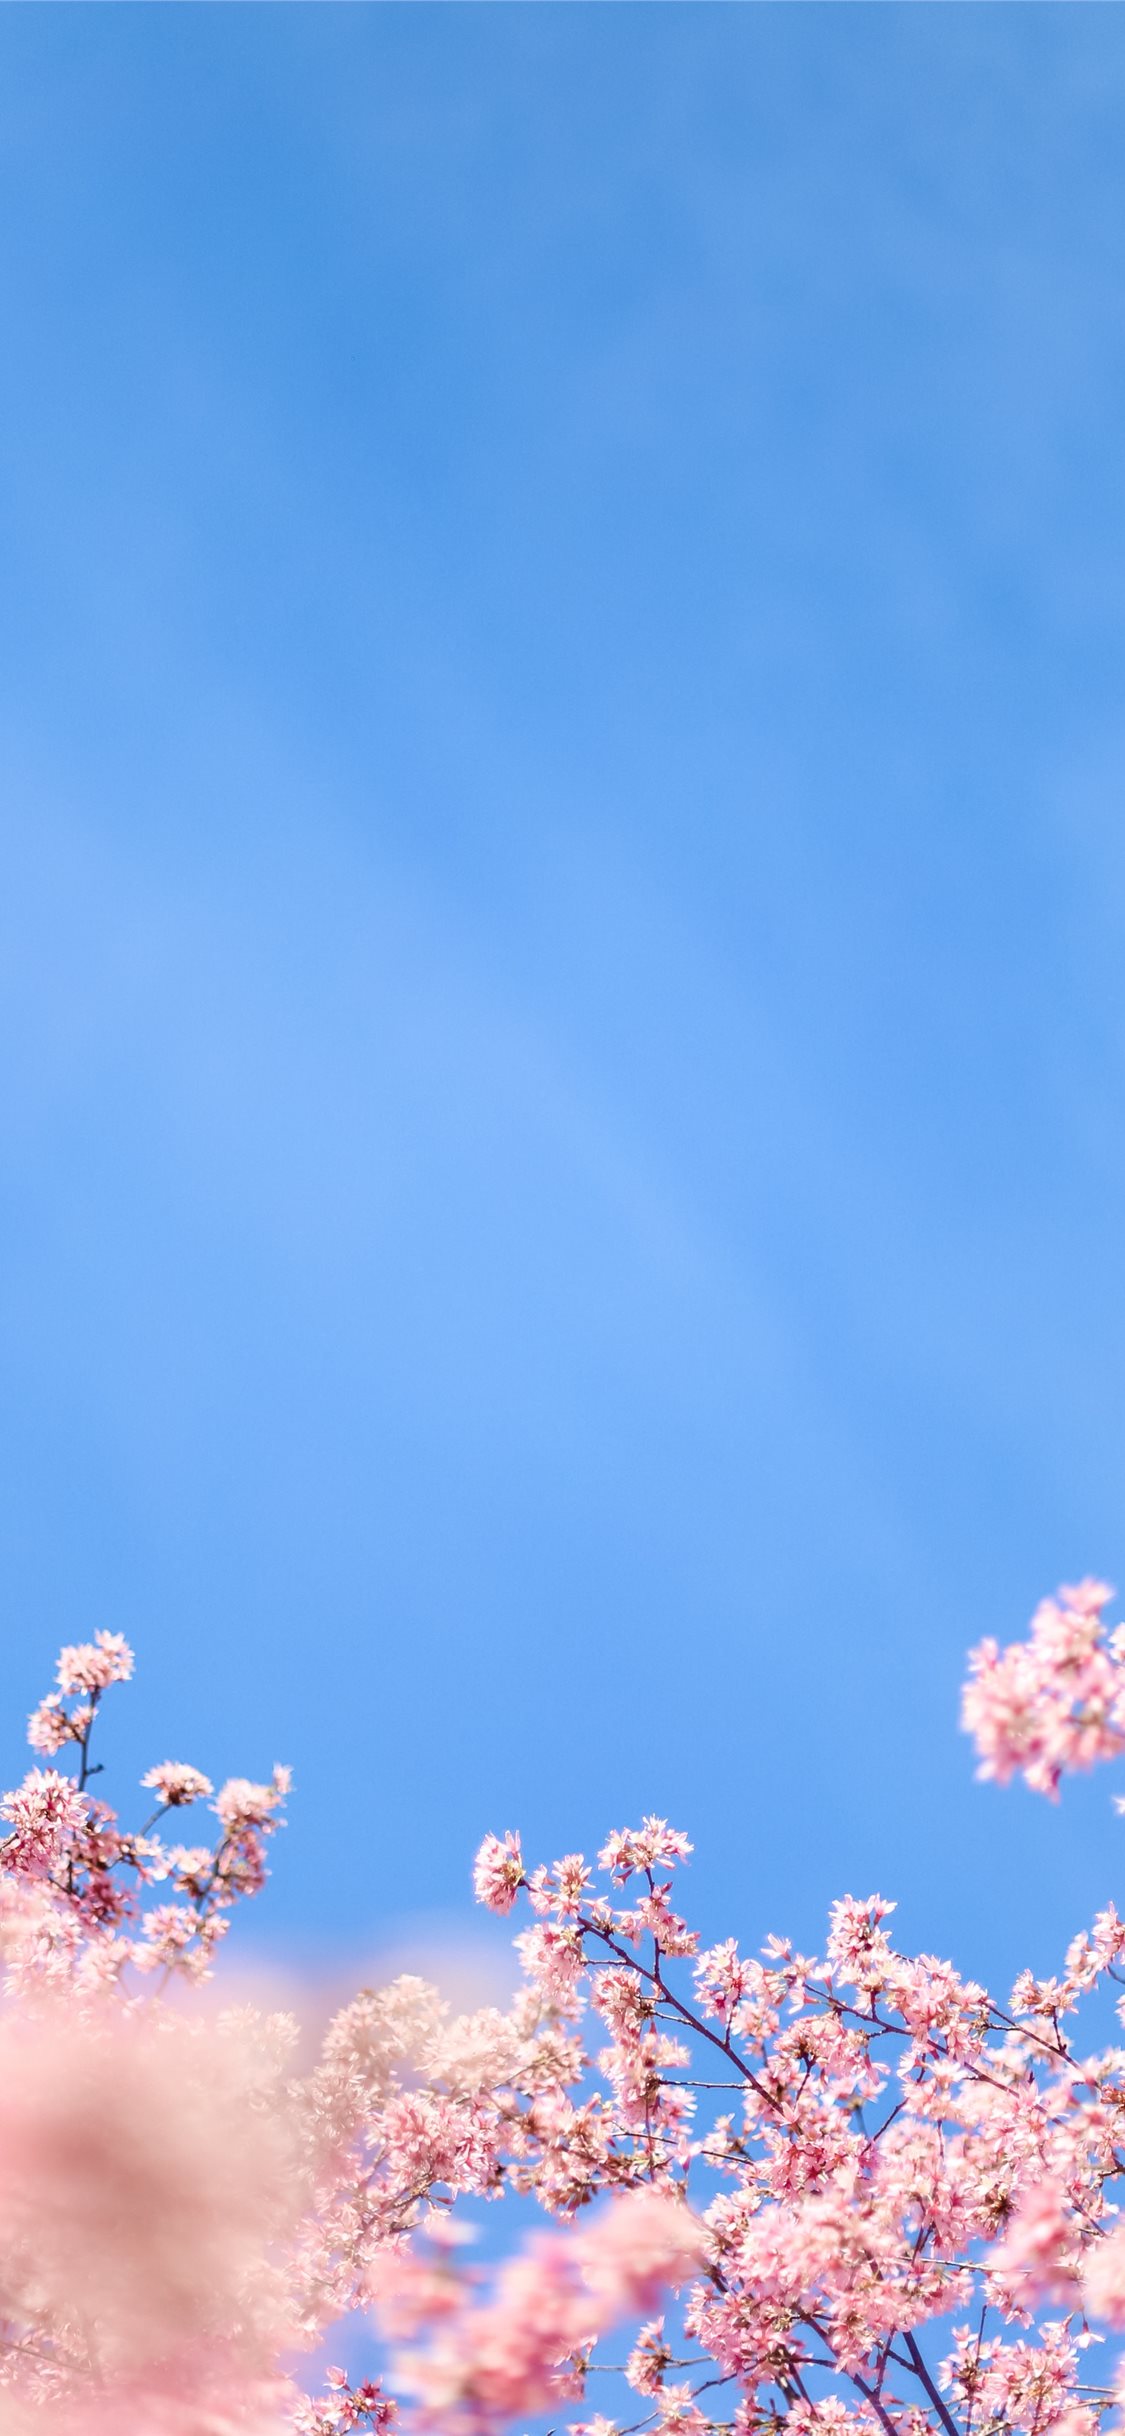 white cherry blossom under blue sky during daytime iPhone X Wallpapers Free  Download